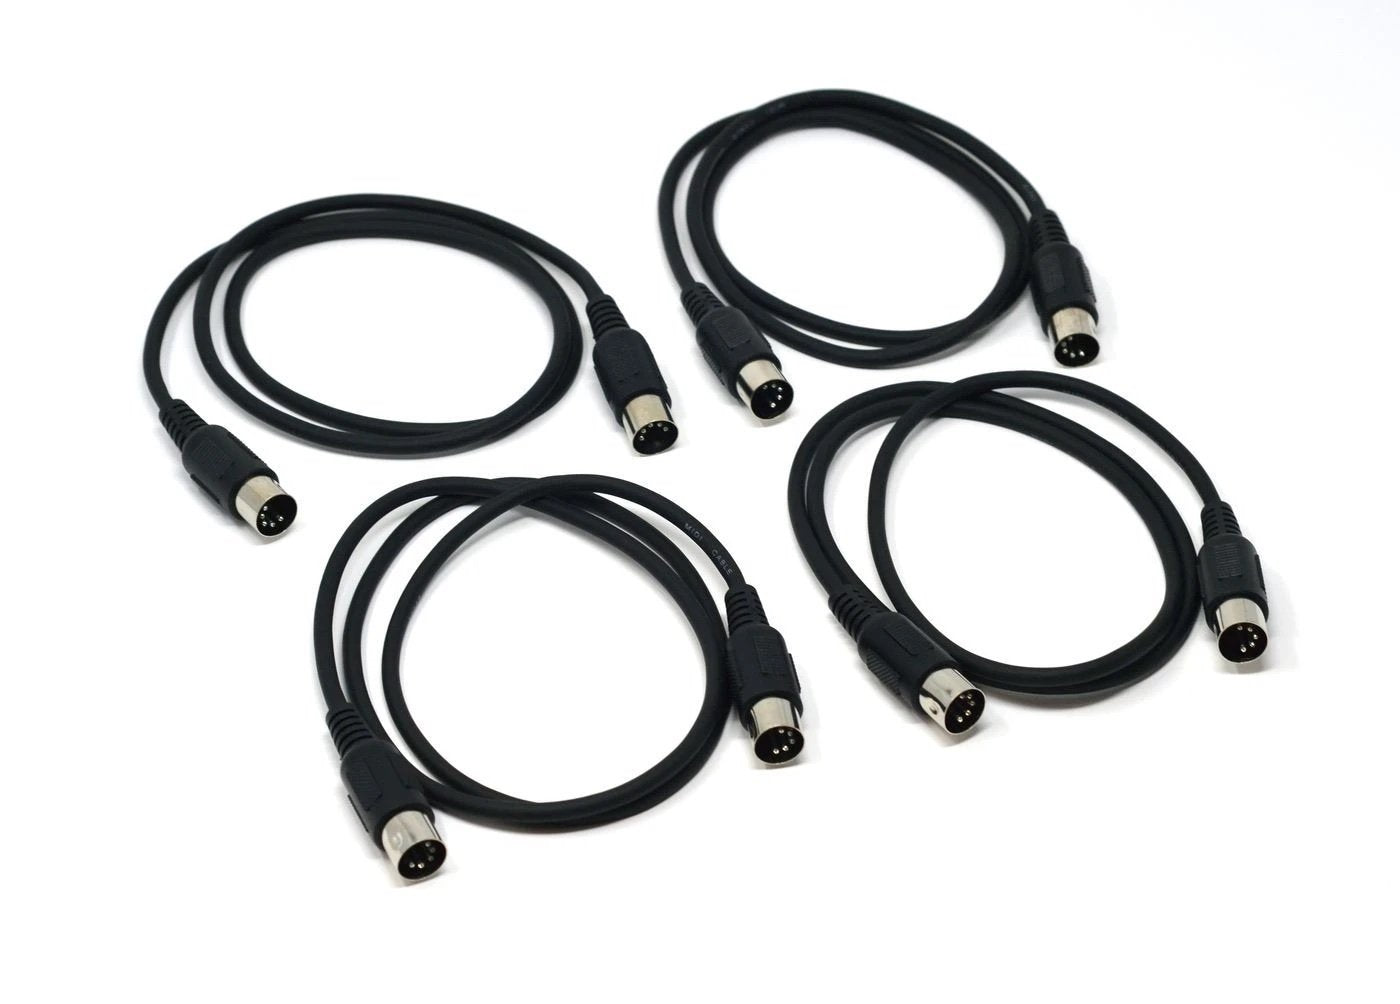 4 pack MIDI cables